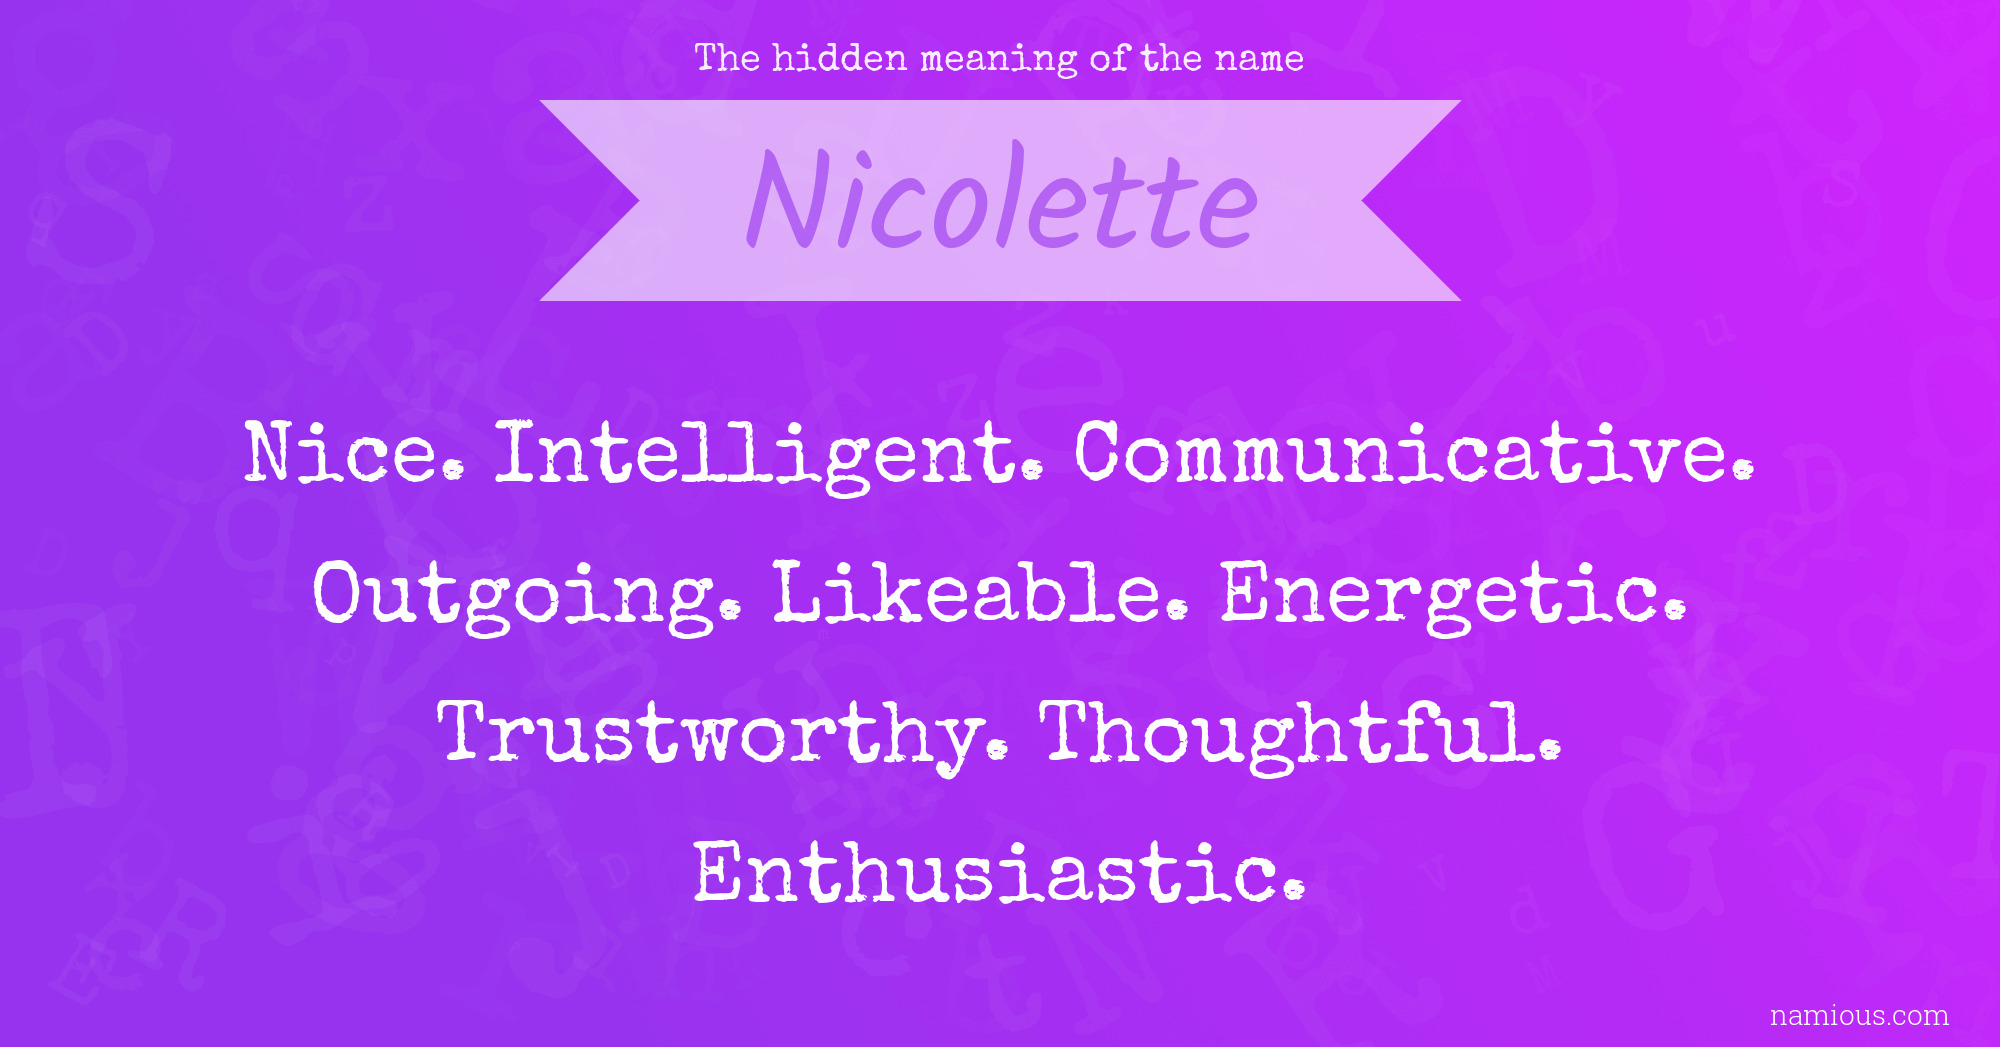 The hidden meaning of the name Nicolette